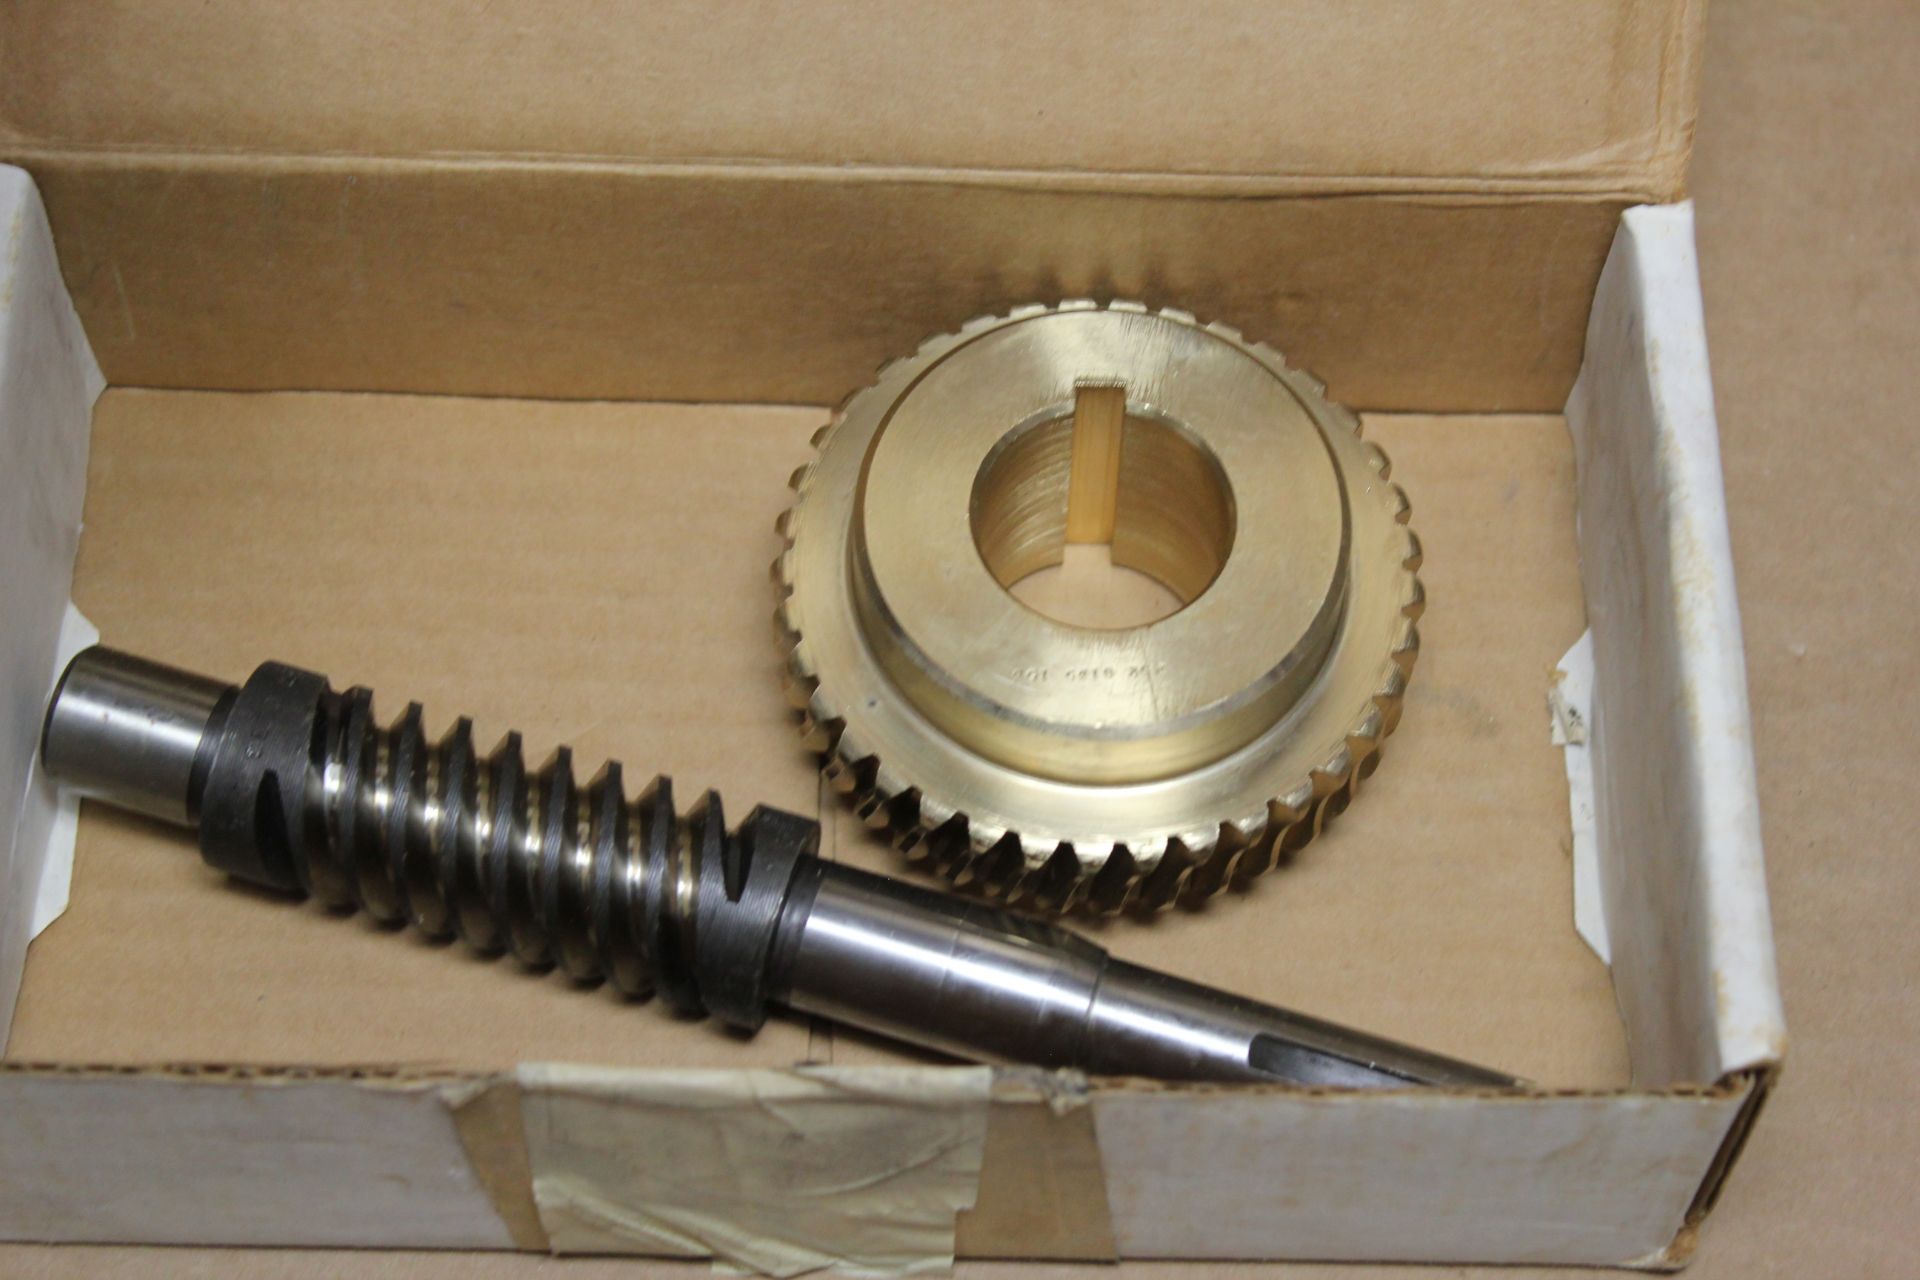 LOT OF 2 NEW MILTON ROY WORM GEAR SET - Image 5 of 5